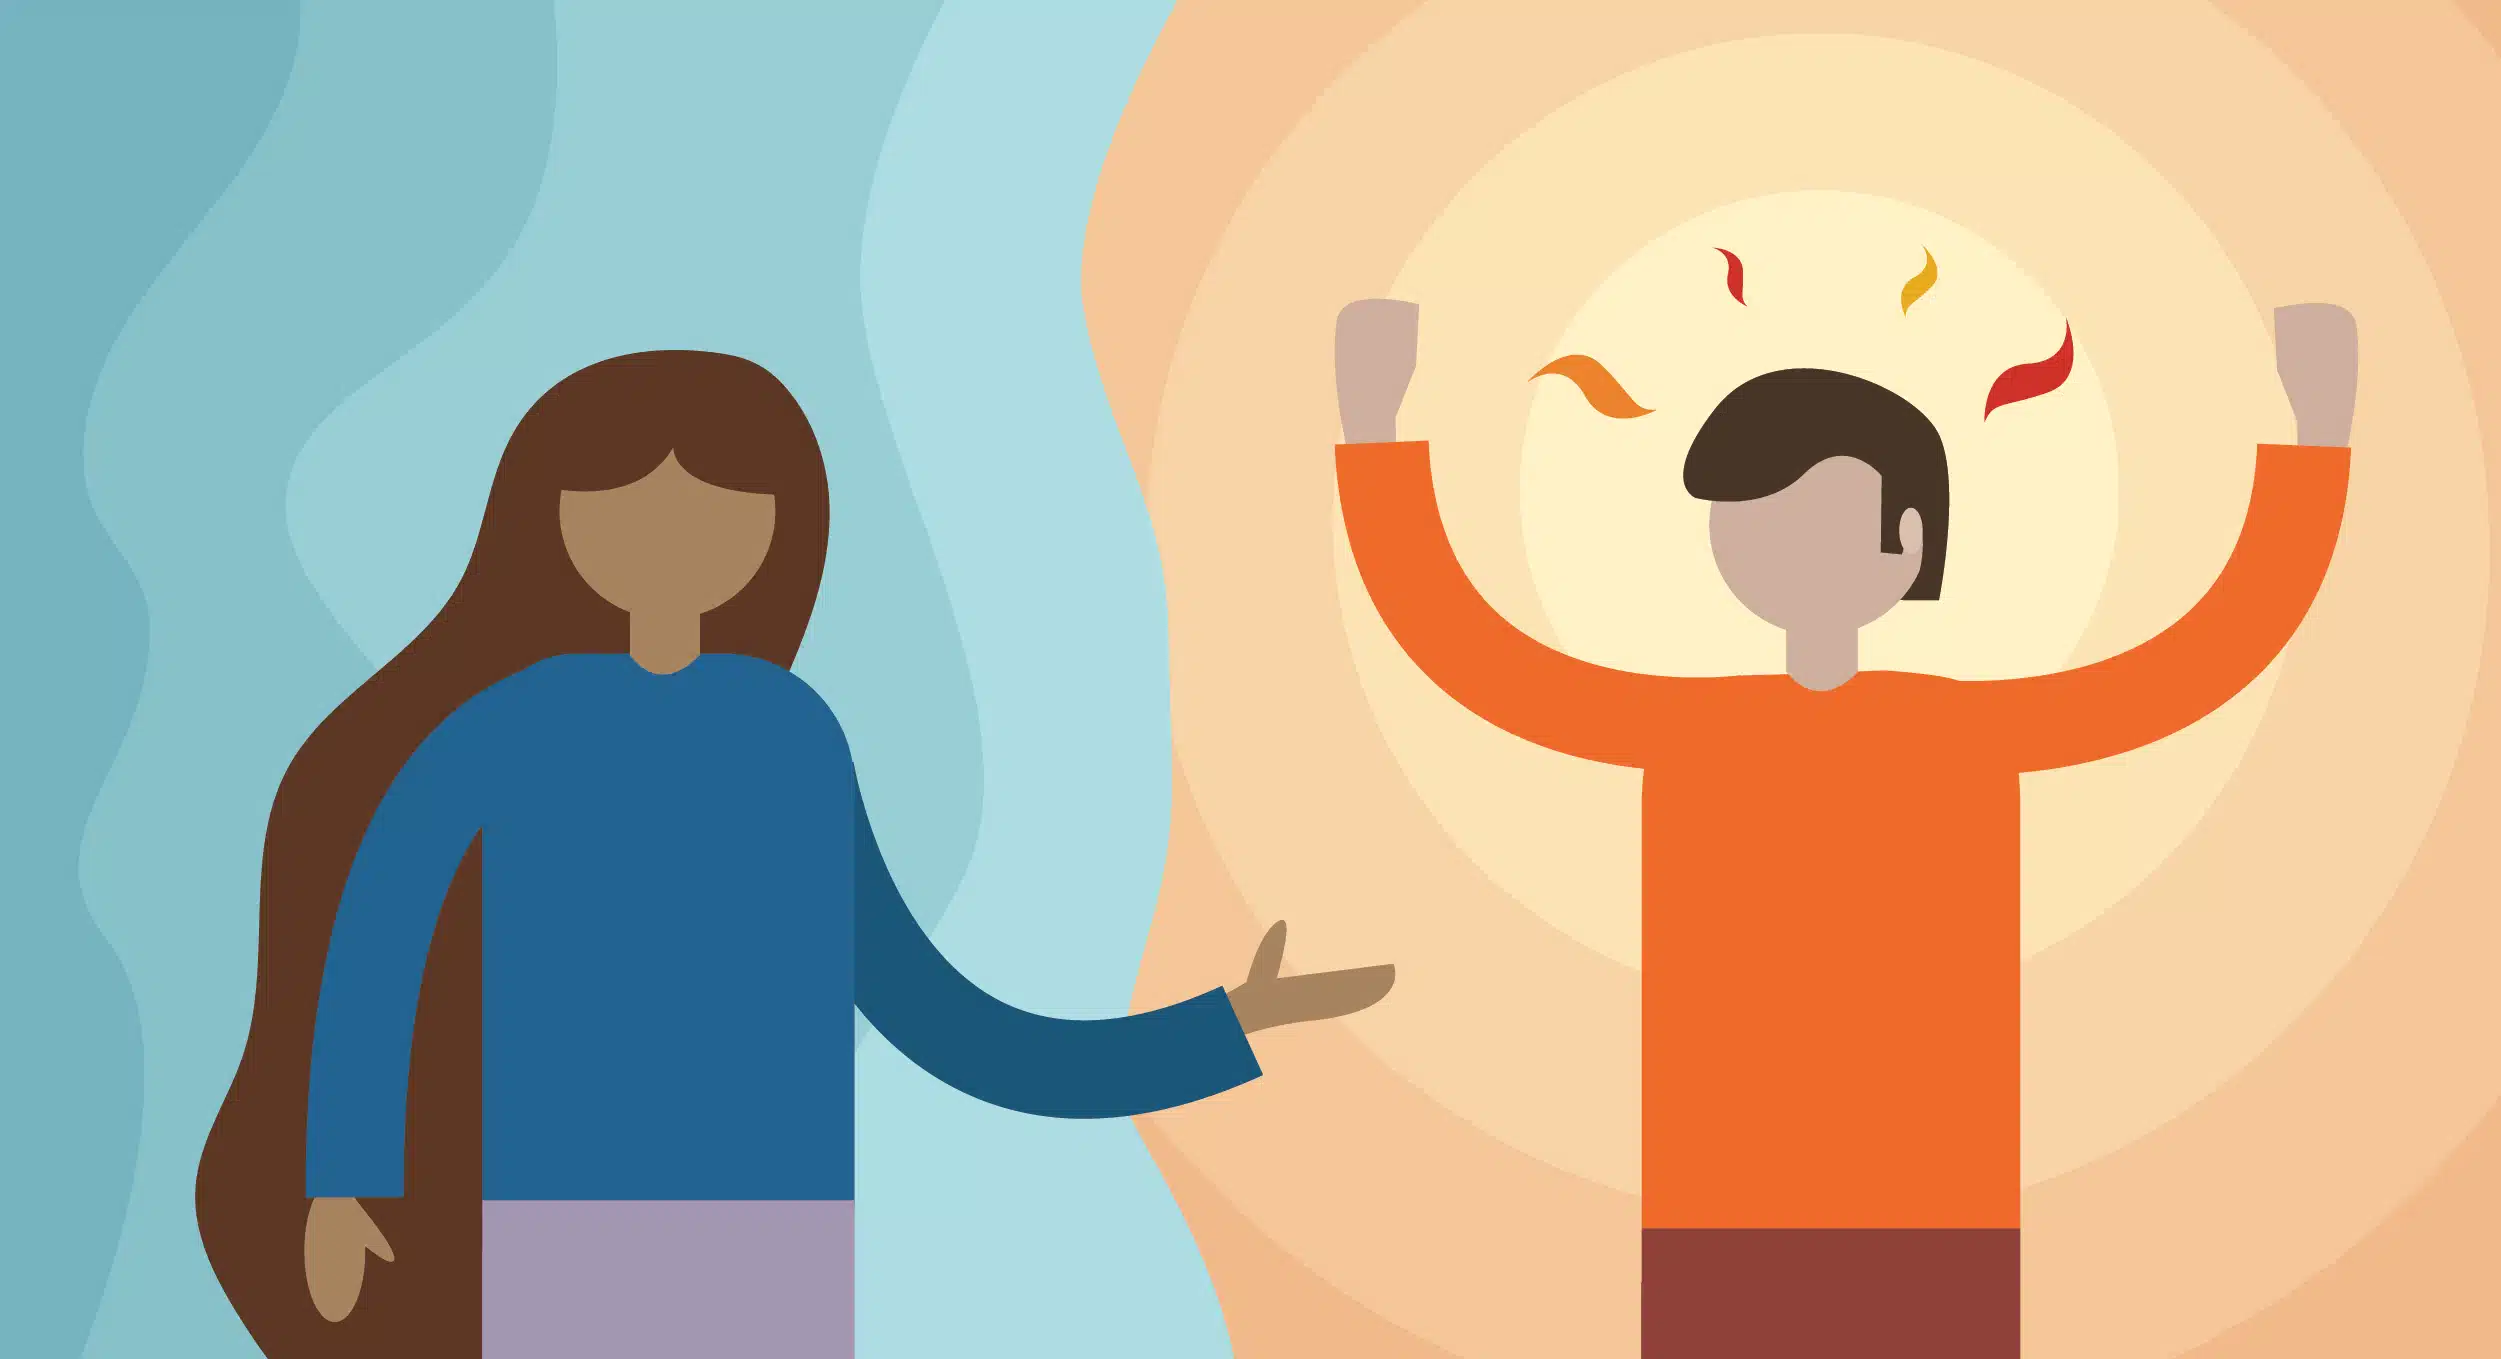 Illustration of person with light blue waves around them signifying calm talking to someone in orange with orange circles around them signifying anger. The calm person is attempting to de-escalate or calm the angry person. For CTRI's E-learning E-Course De-escalating Potentially Violent Situations